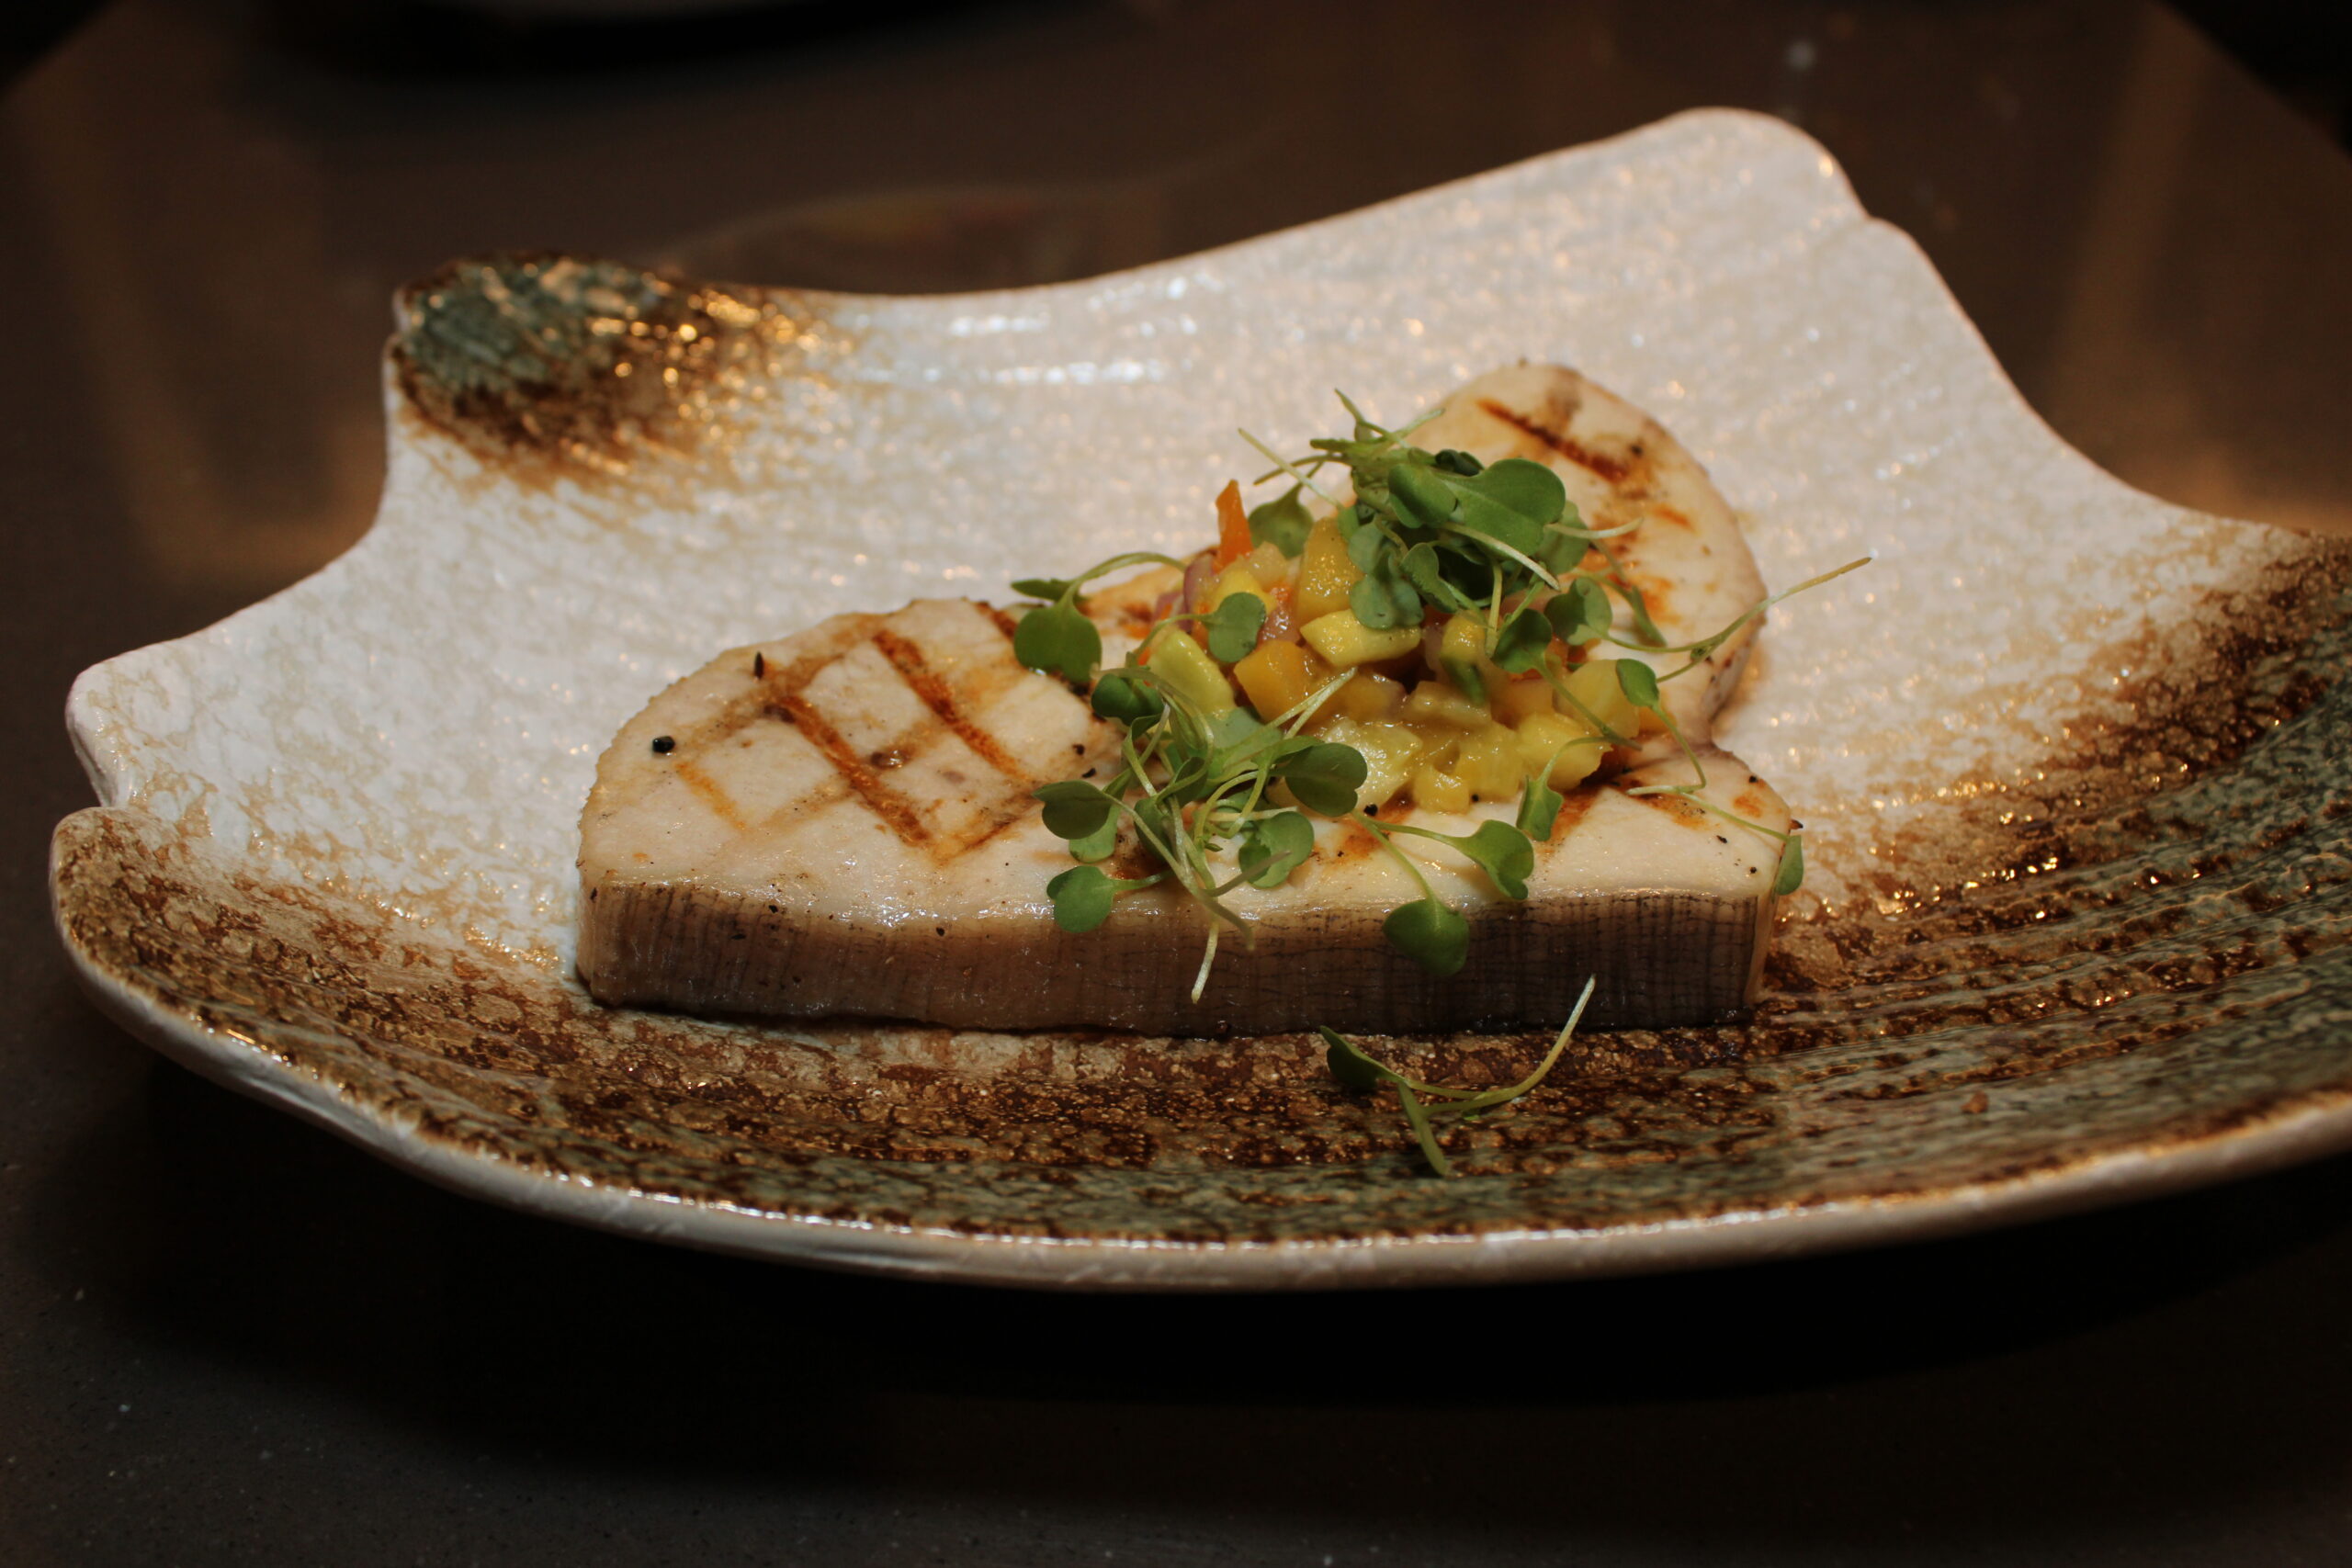 A plated swordfish steak topped with tropical pineapple and mango salsa